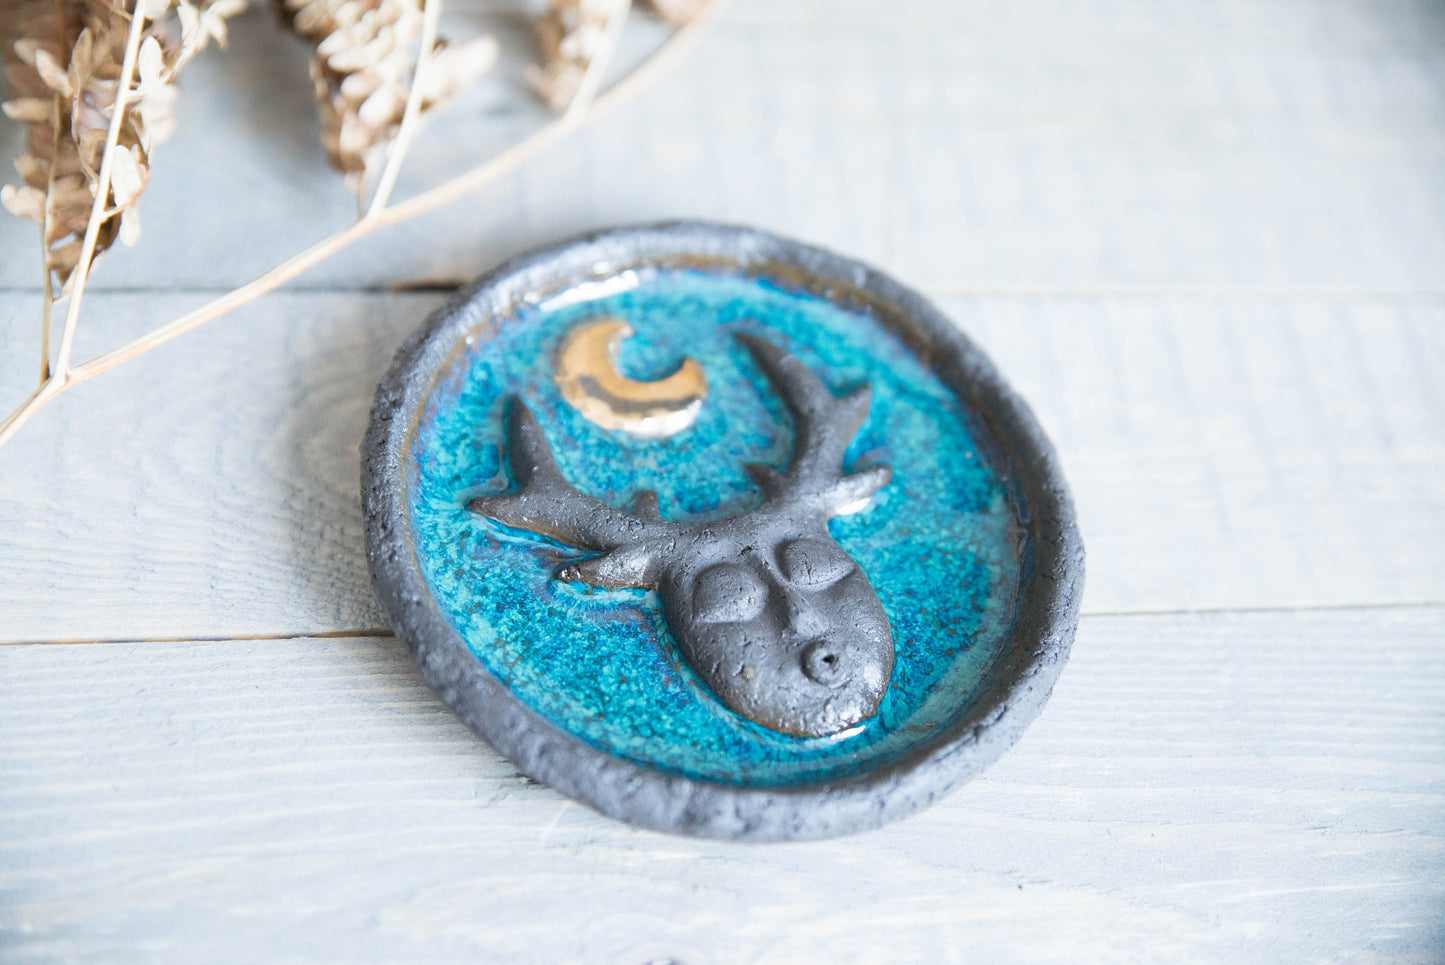 Palo Santo burner plate with the gold plated moon - Dark blue cone incense smudging ceramic plate